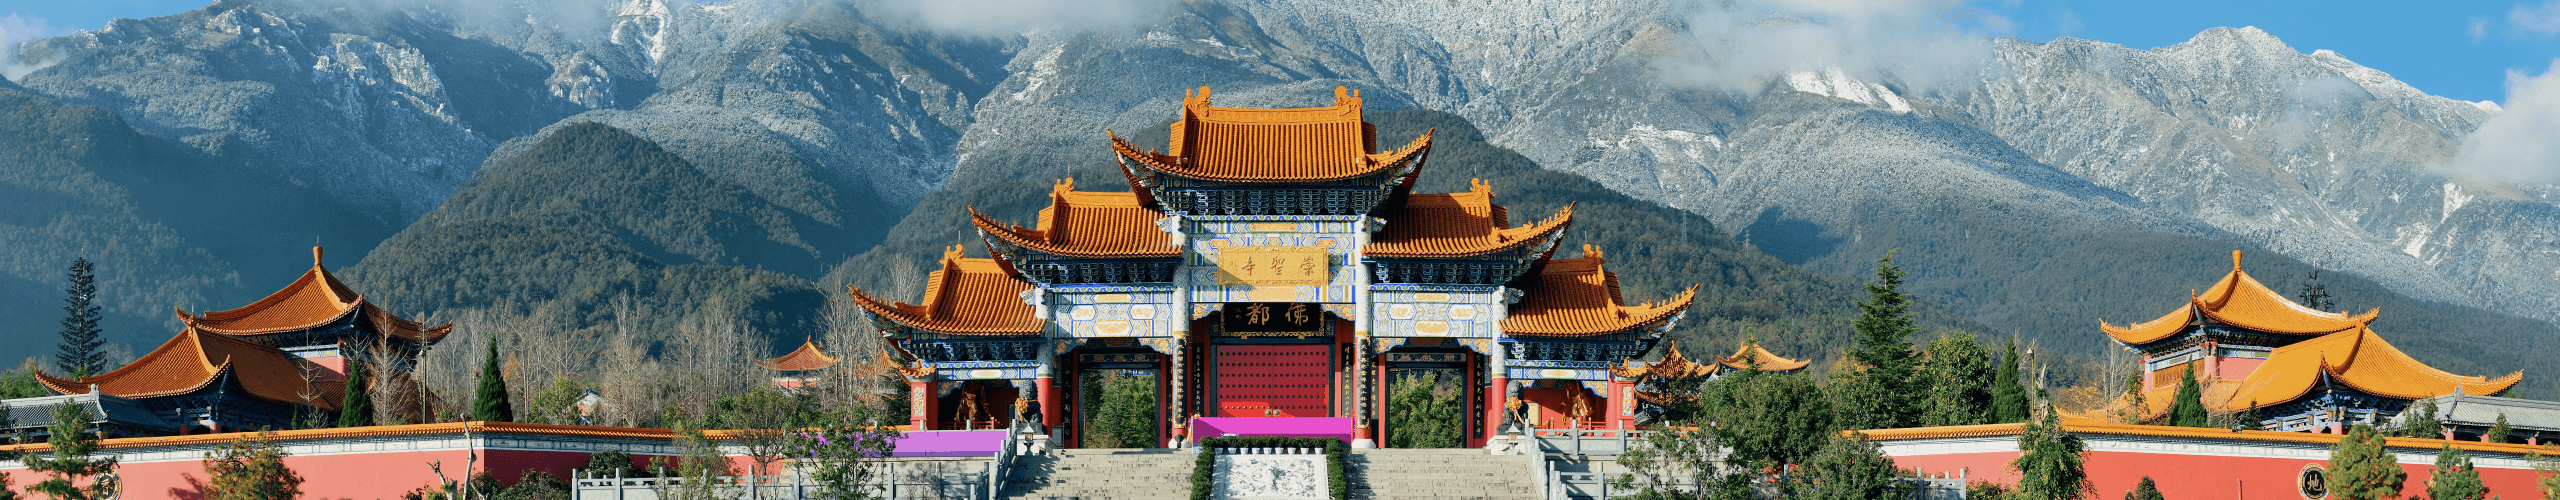 Temple in China in front of mountains